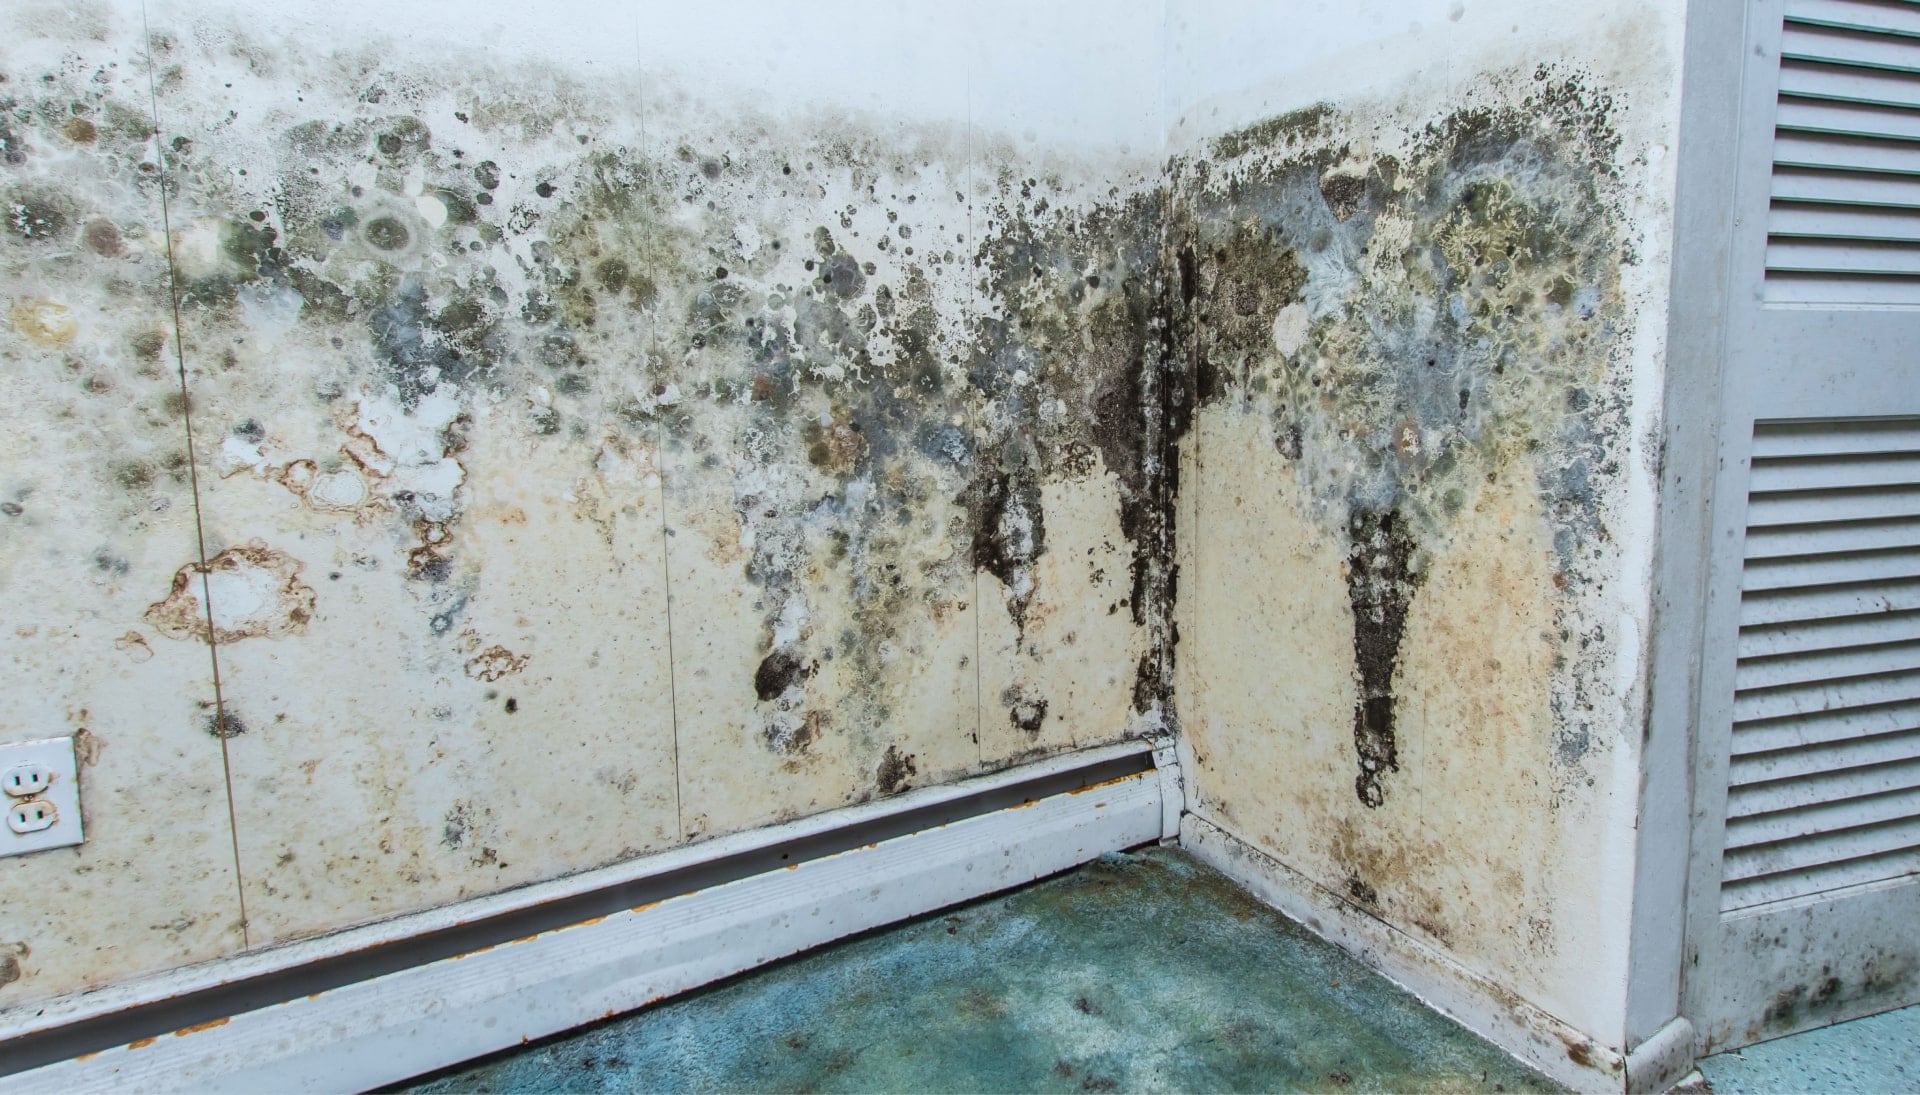 A mold remediation team using specialized techniques to remove mold damage and control odors in a Boca Raton property, with a focus on safety and efficiency